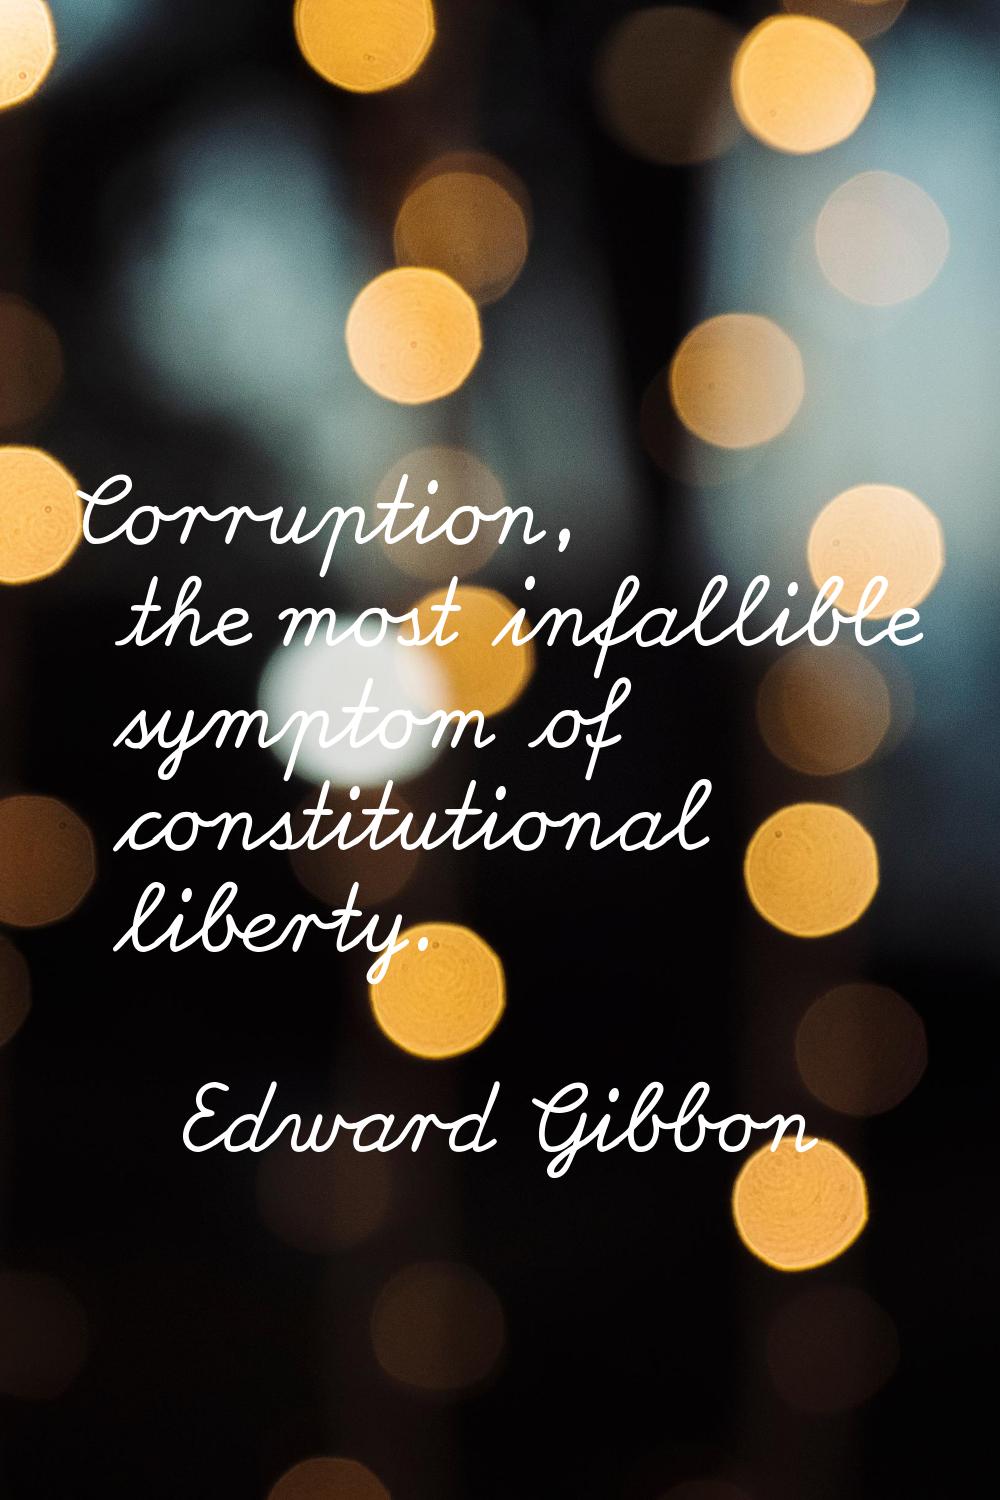 Corruption, the most infallible symptom of constitutional liberty.